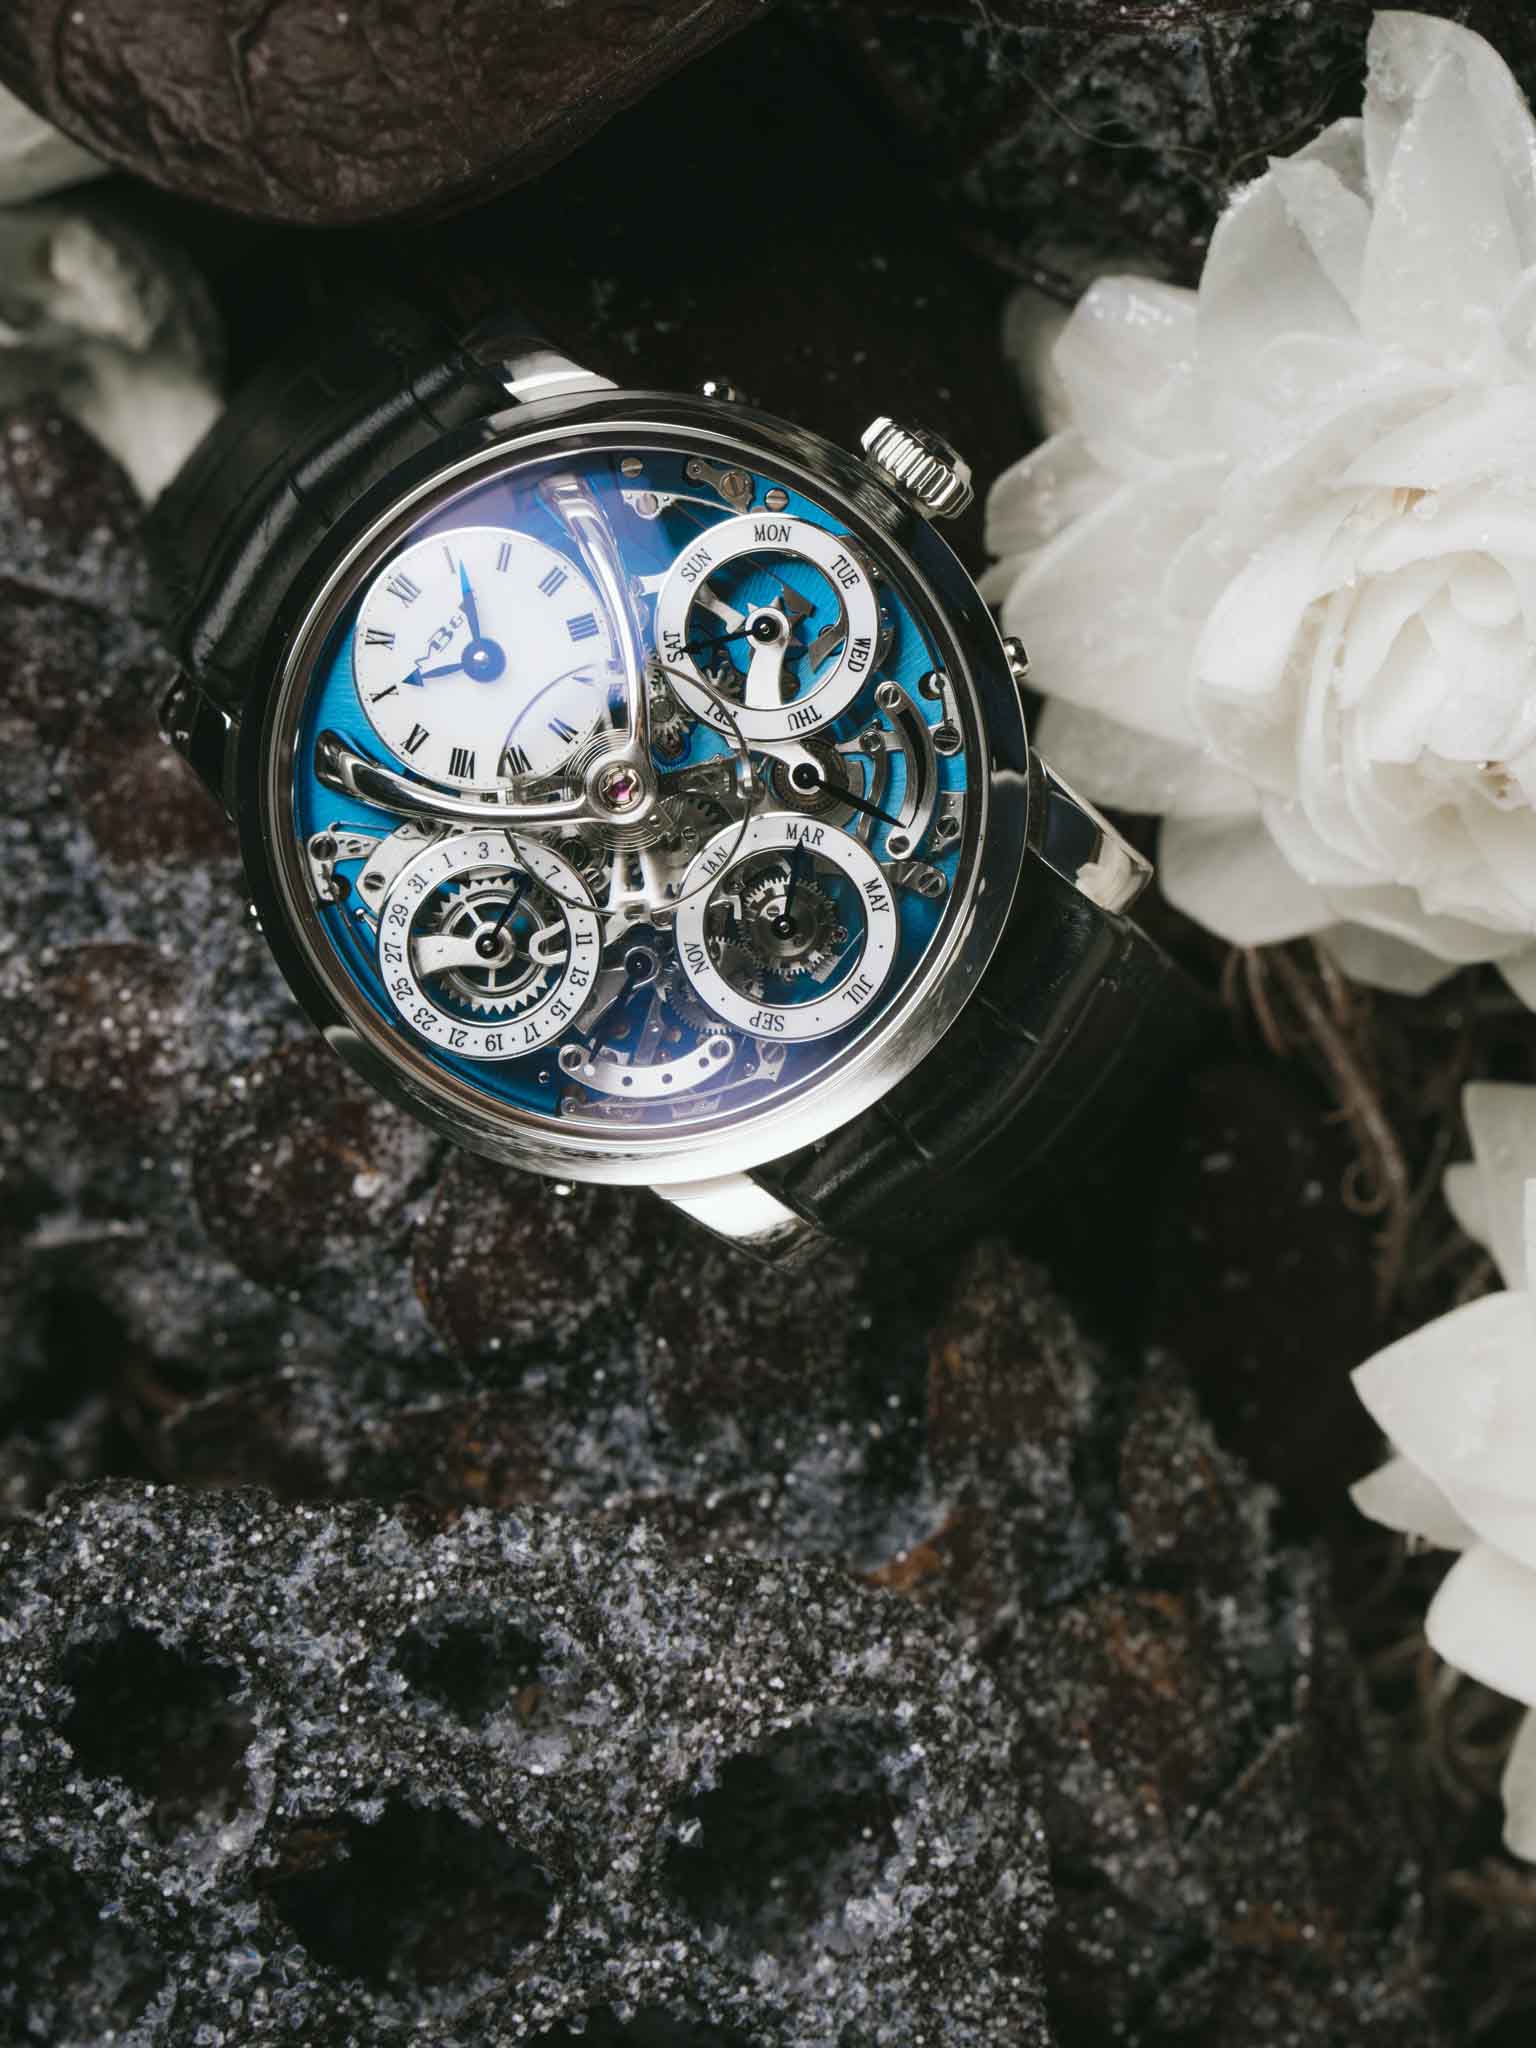 Introducing The MB&F Legacy Machine Perpetual Calendar Watch (And The Best Live Photos Of It You’ll See Today)